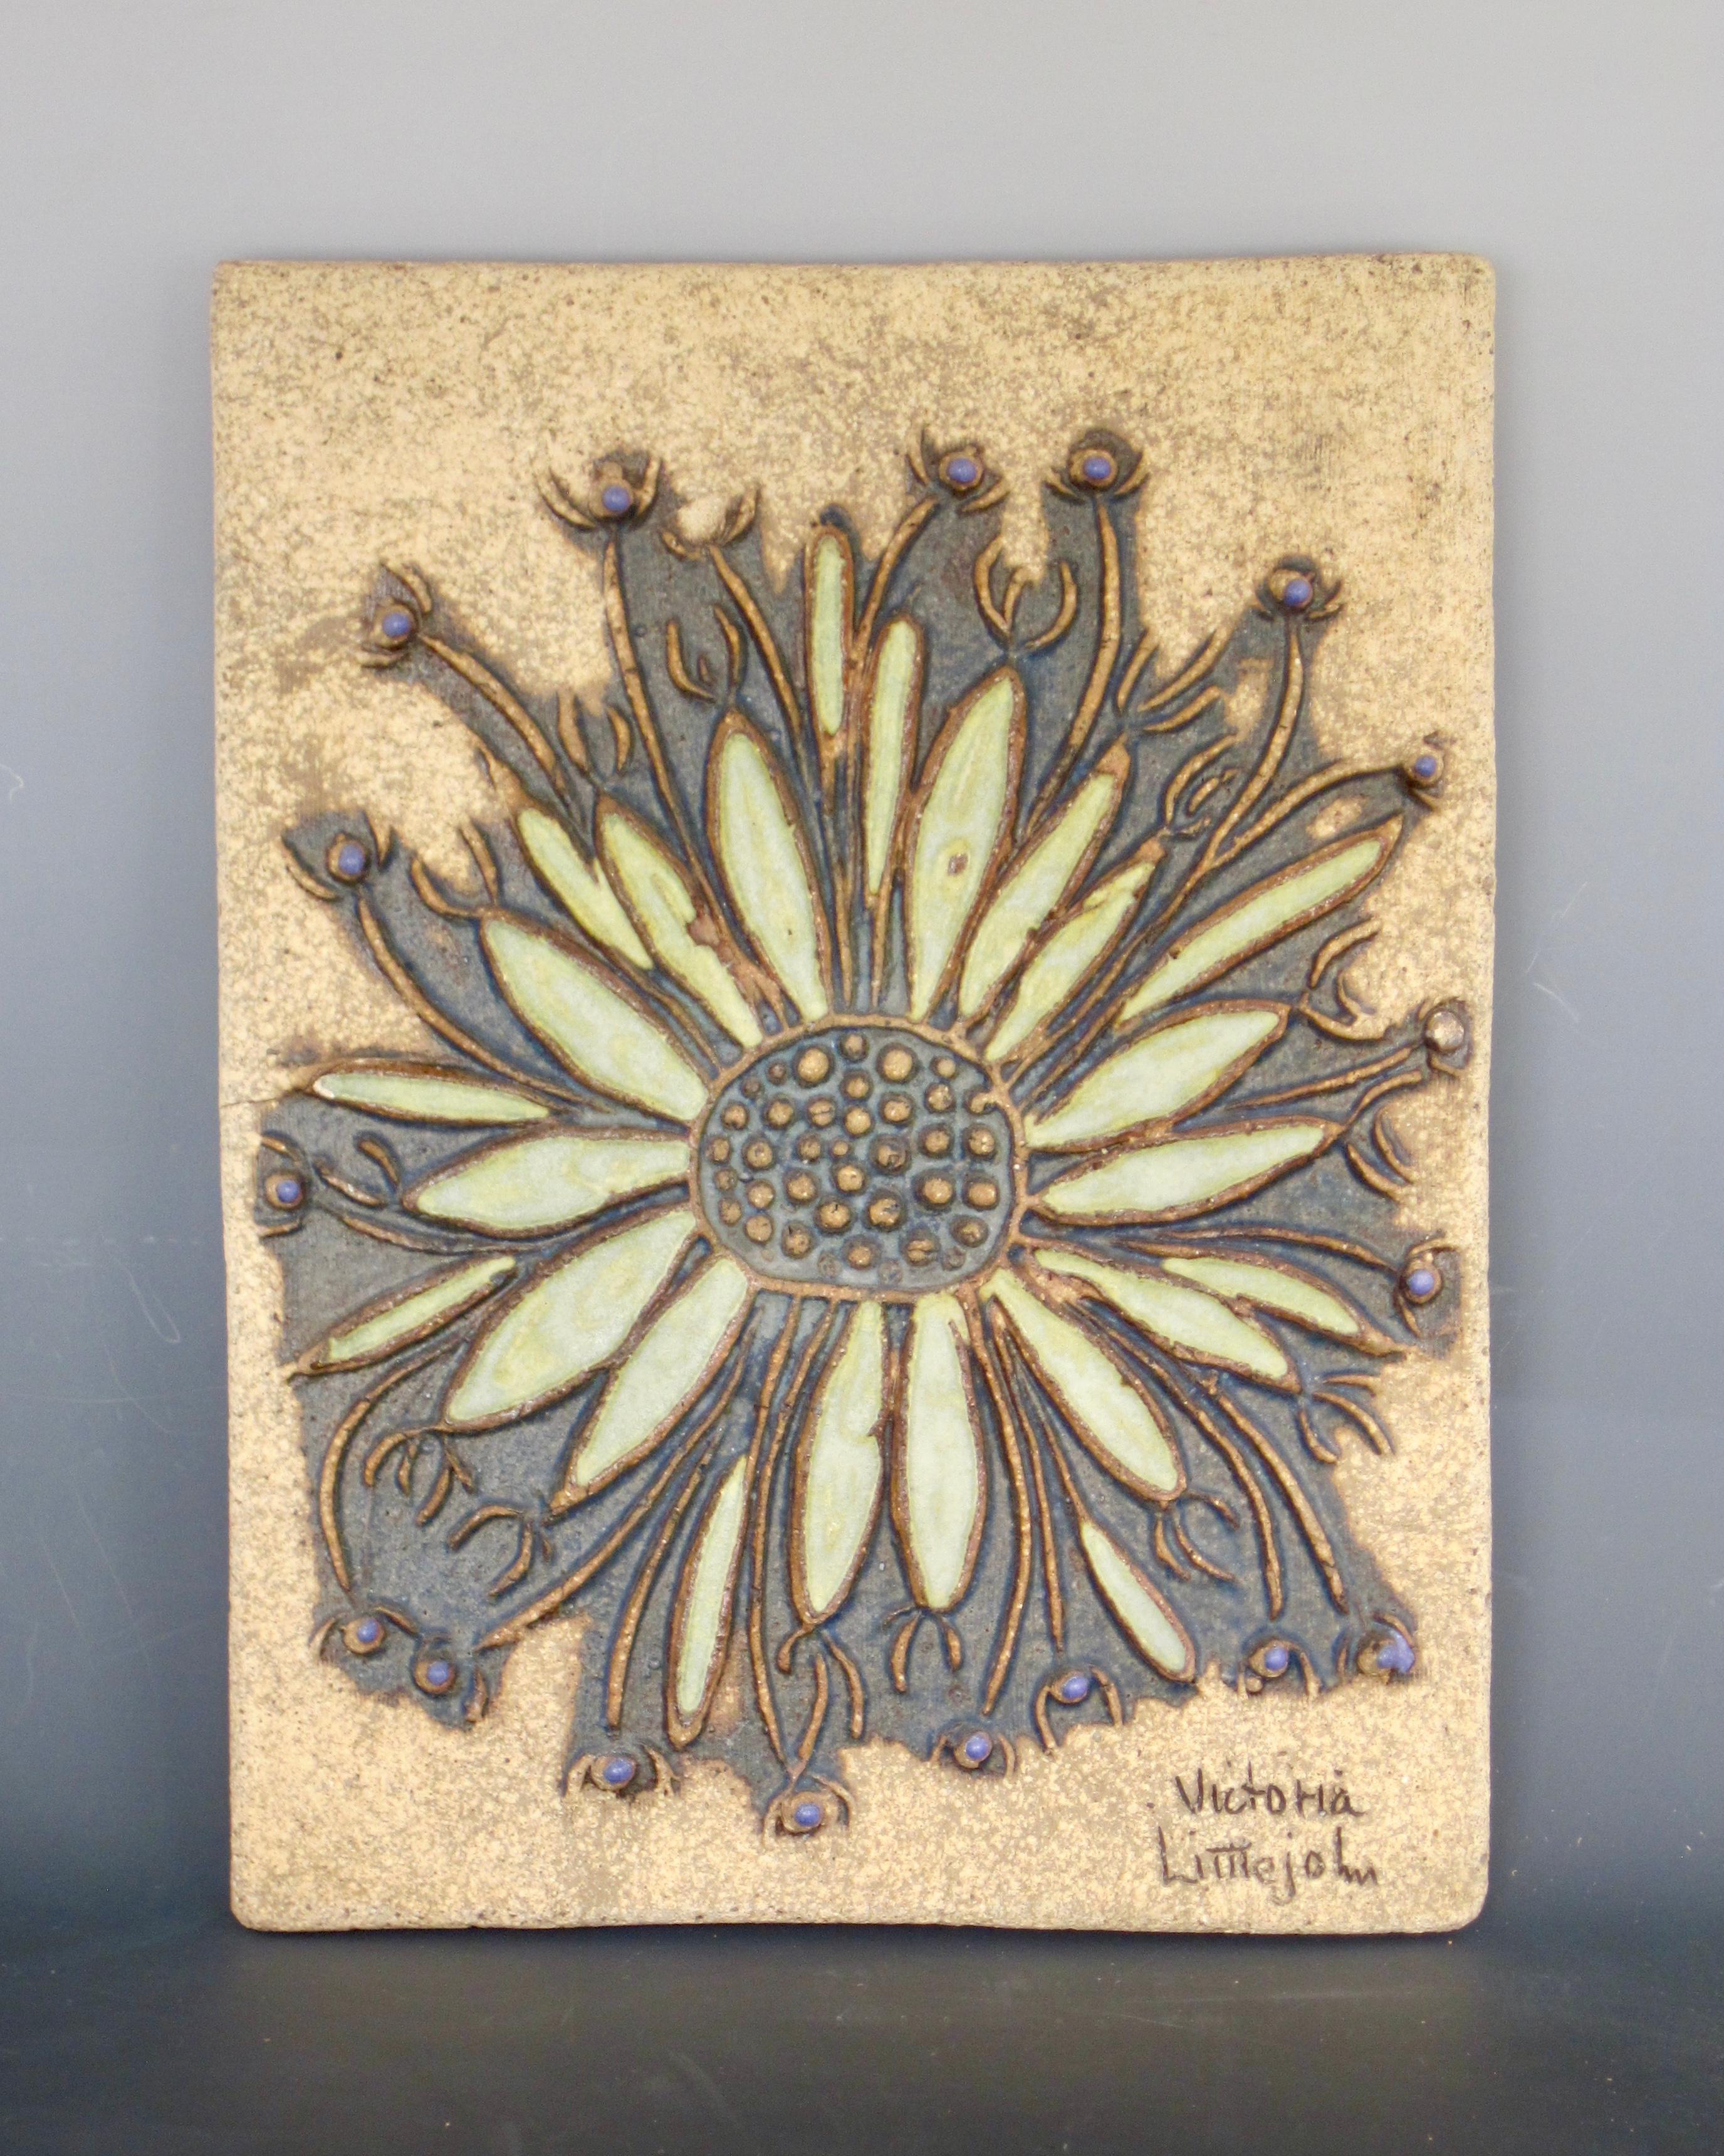 1960s Victoria Littlejohn Studio pottery flower sculpture. A 3 dimensional surface with outlines of the leaves and pistil in the center as well as the the grassy pieces with pods. Pressed board on the reverse with two hooks for hanging.